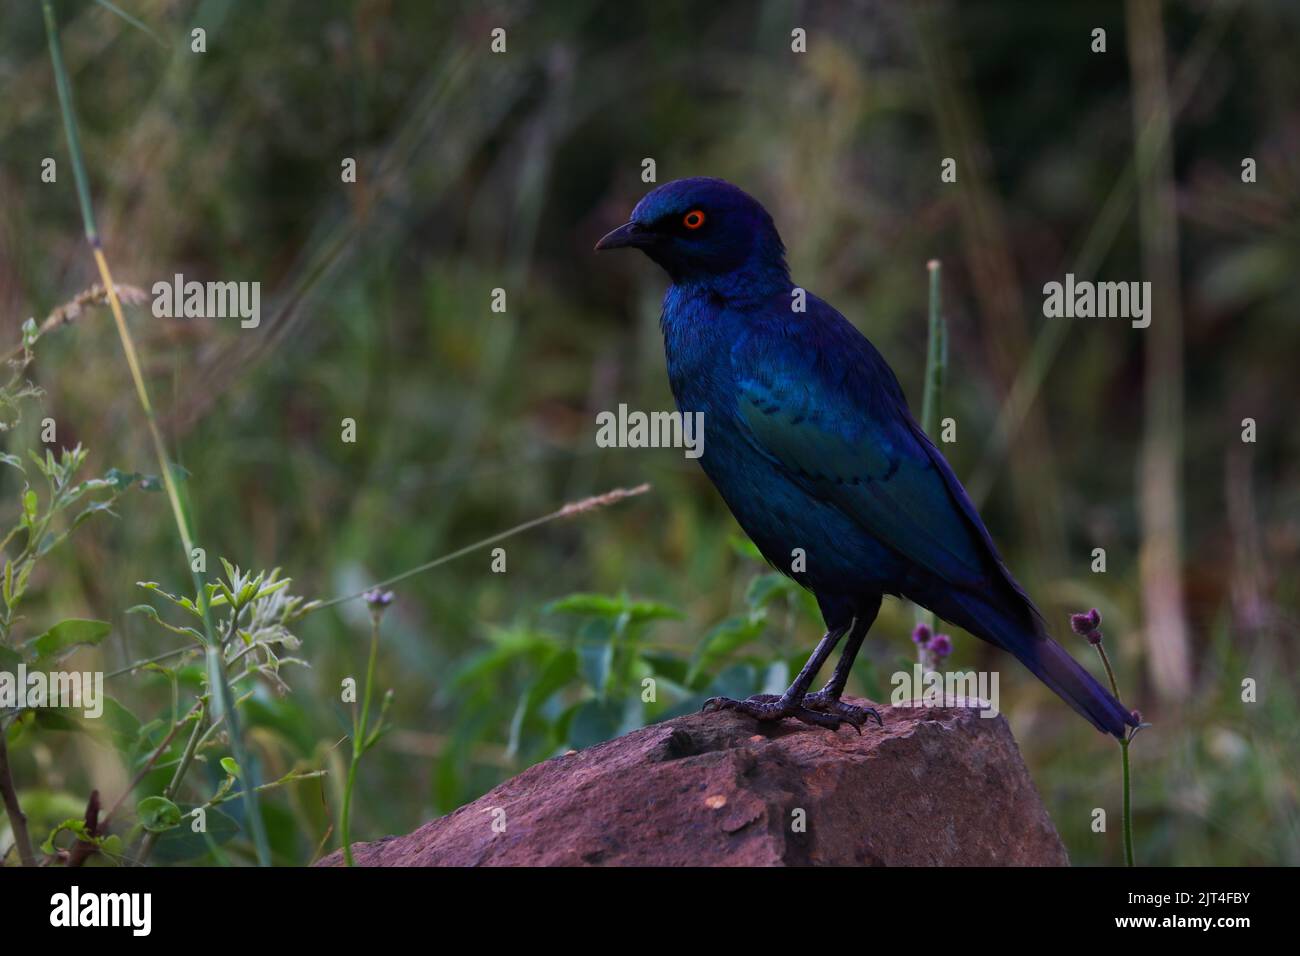 Greater Blue-Eared Starling Bird On A Rock (Lamprotornis chalybaeus) Stock Photo